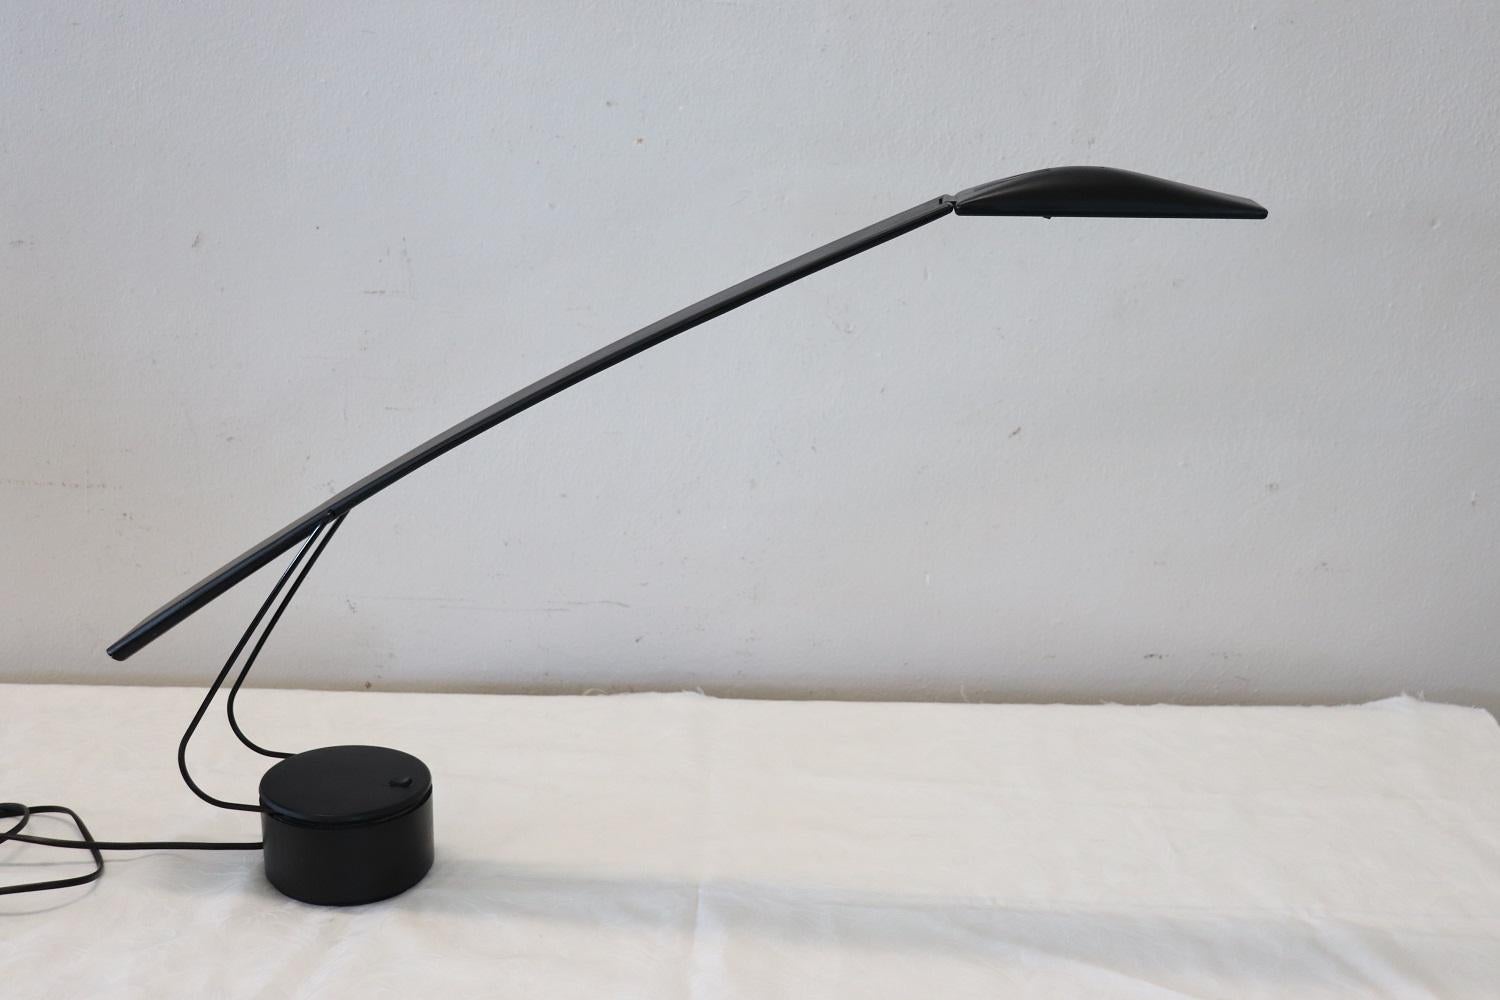 Late 20th Century Italian Design Adjustable Table Lamp by Paf, 1980s